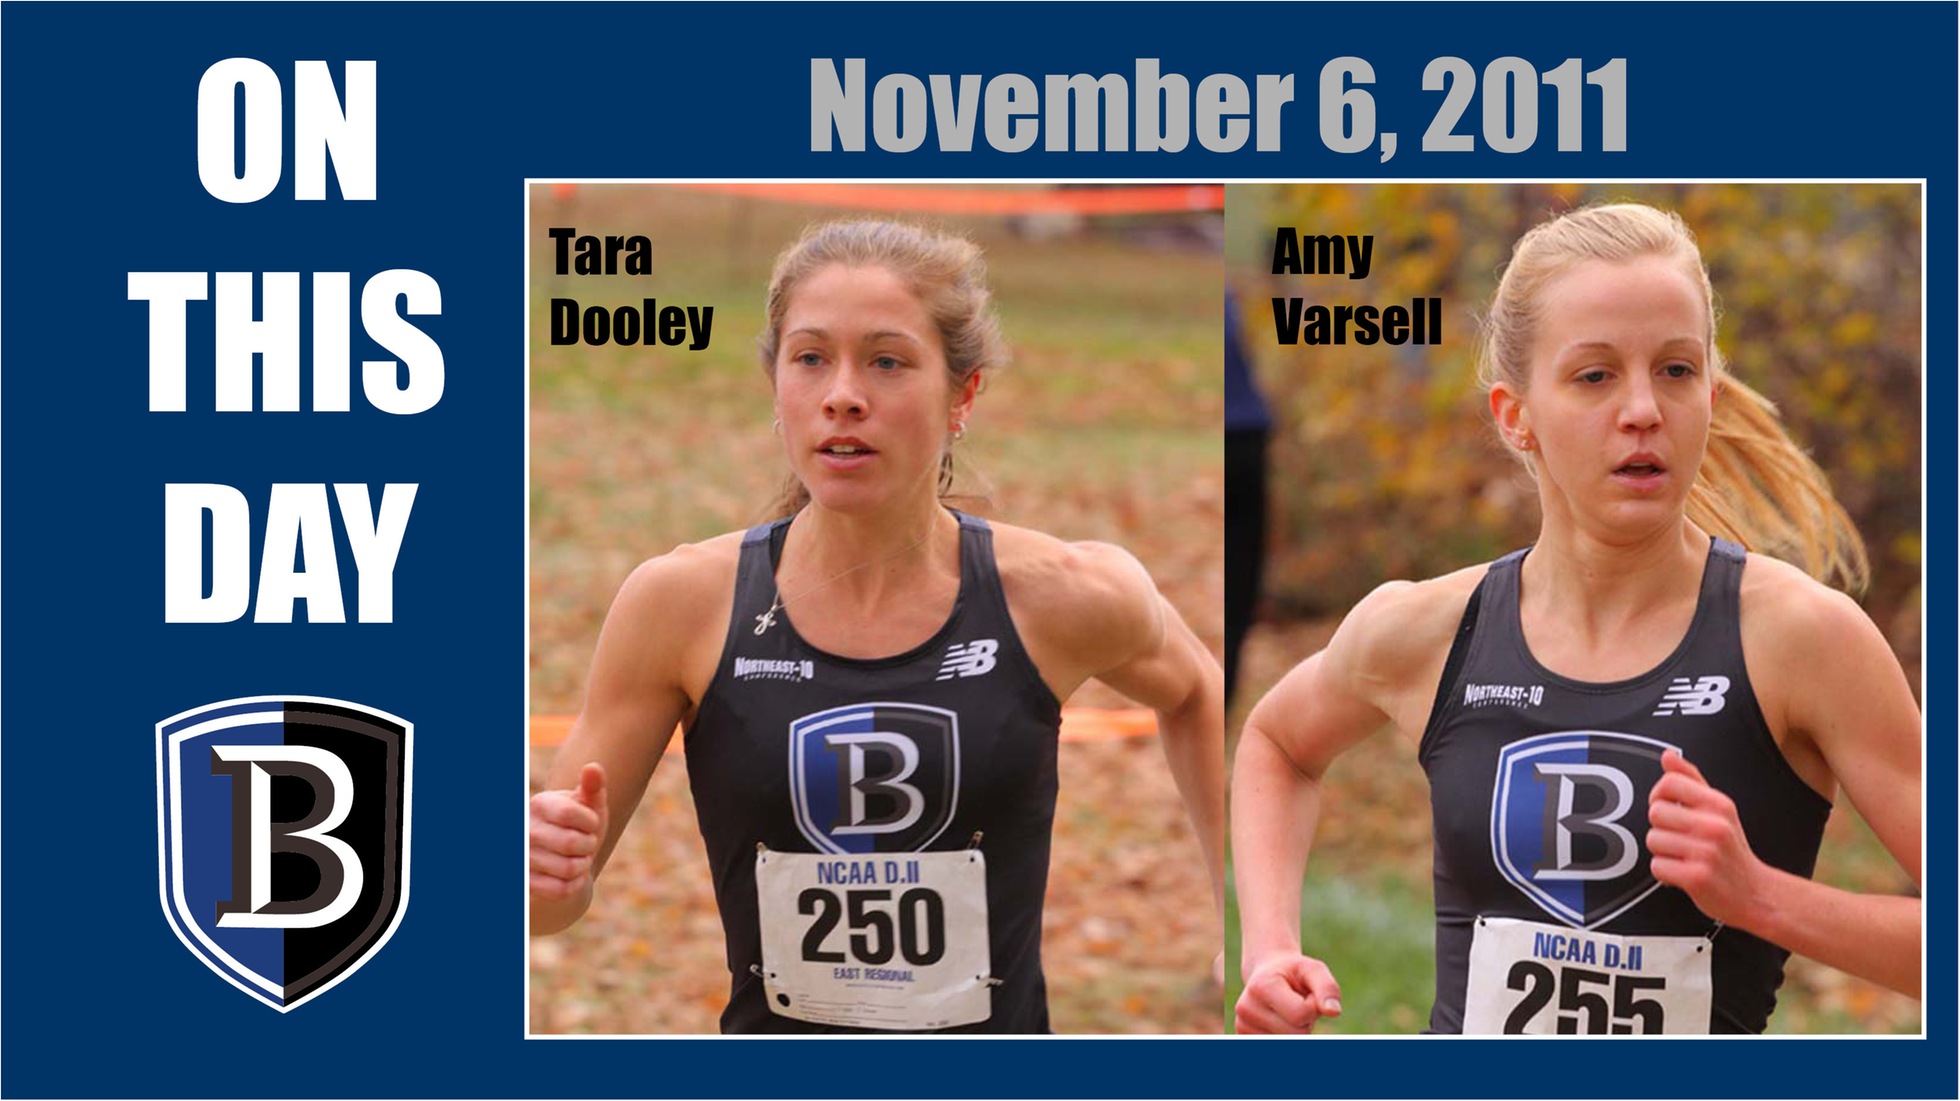 Graphic featuring Tara Dooley and Amy Varsell